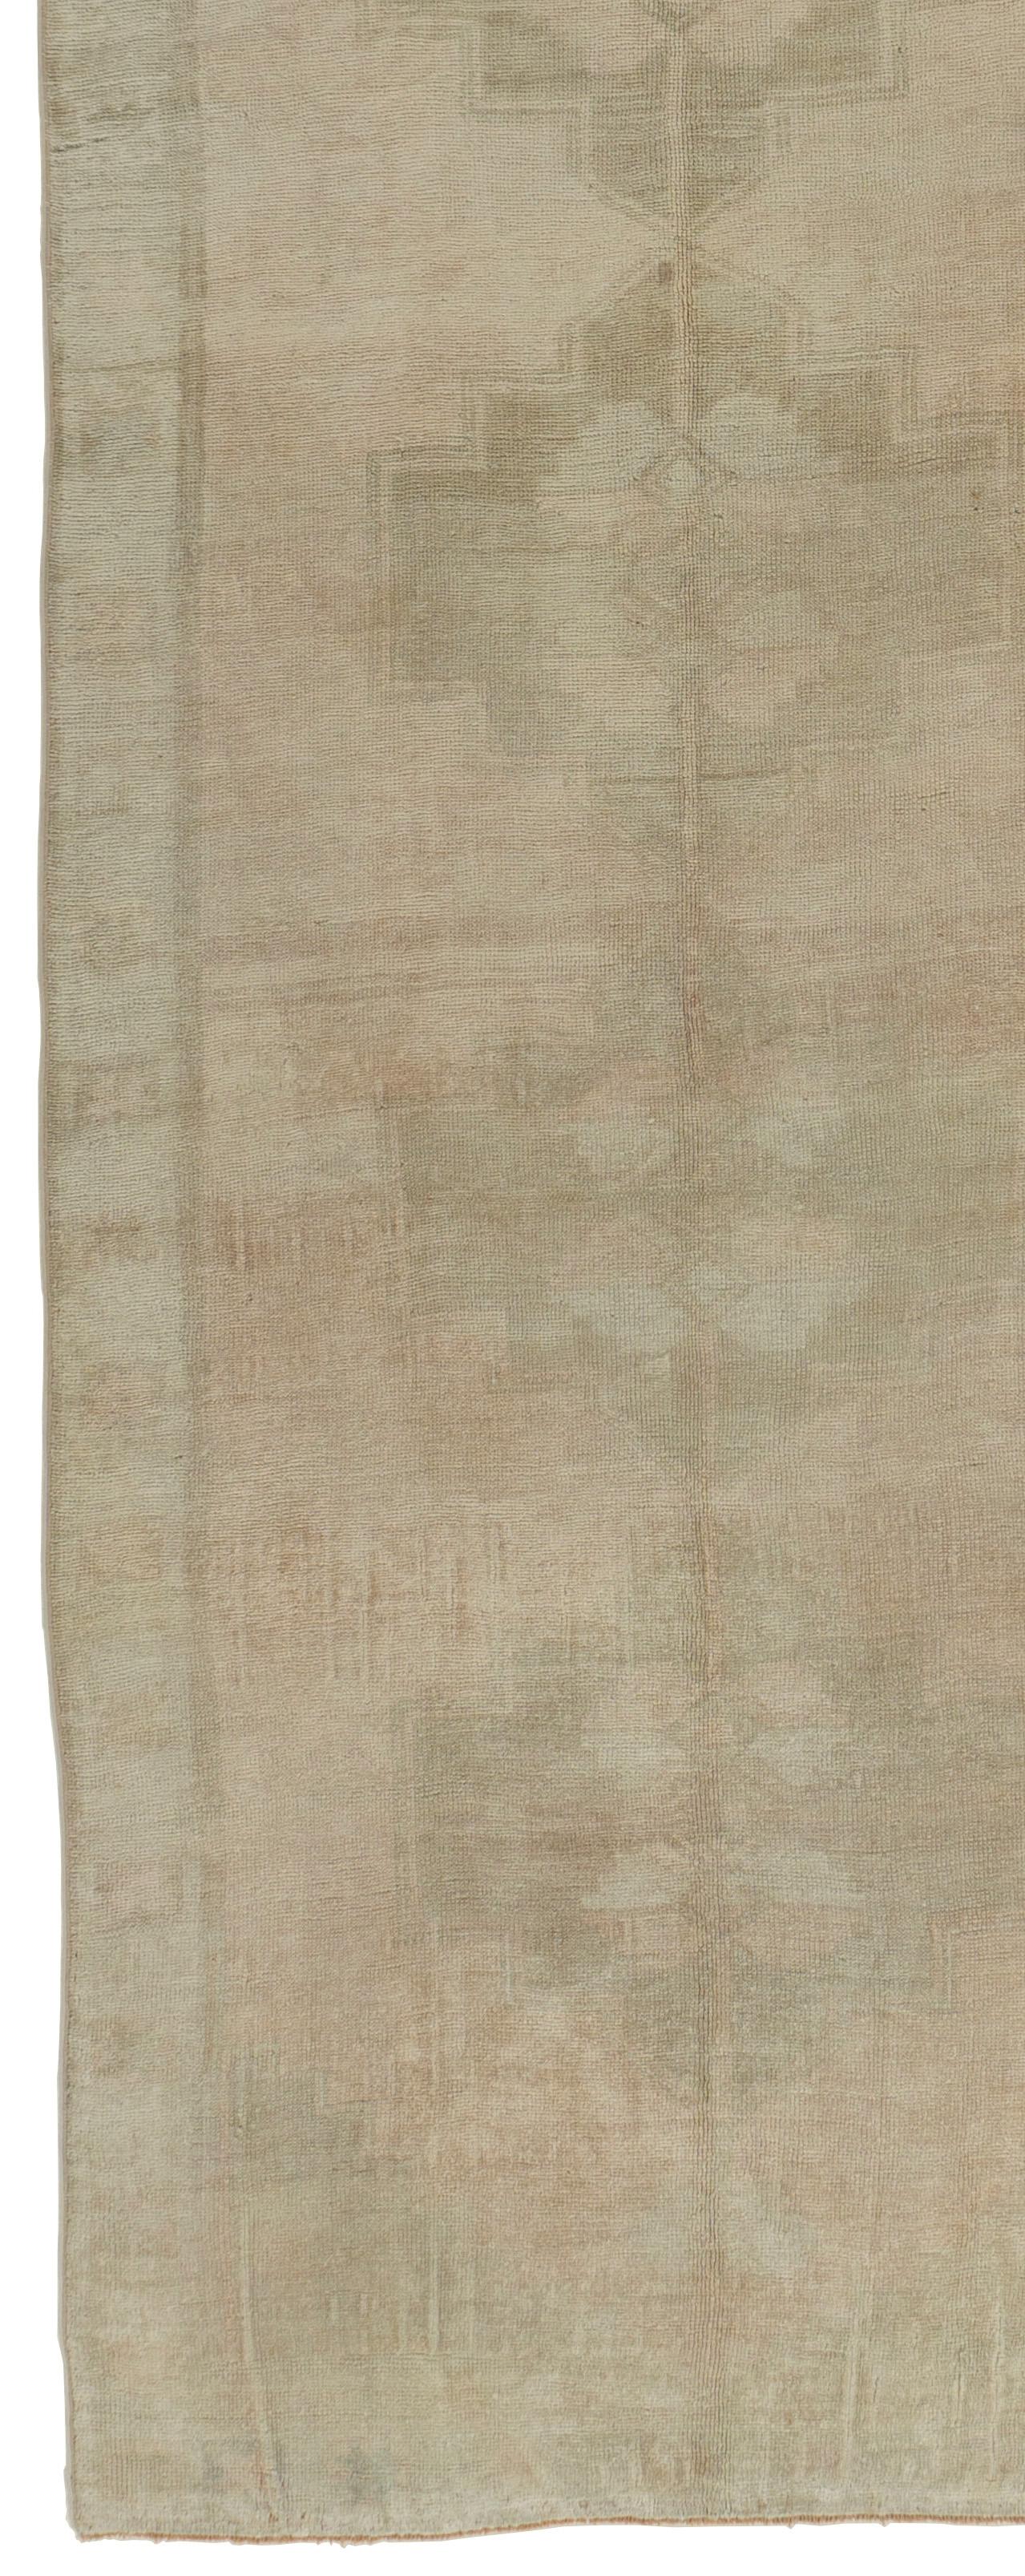 Vintage Subdued Turkish Oushak Runner 4'2 X 13'5. Even today, Oushak rugs are still the first choice of professional interior designers. Sometimes this is because when grading Oushak carpets, carpet connoisseurs will not only look at the overall